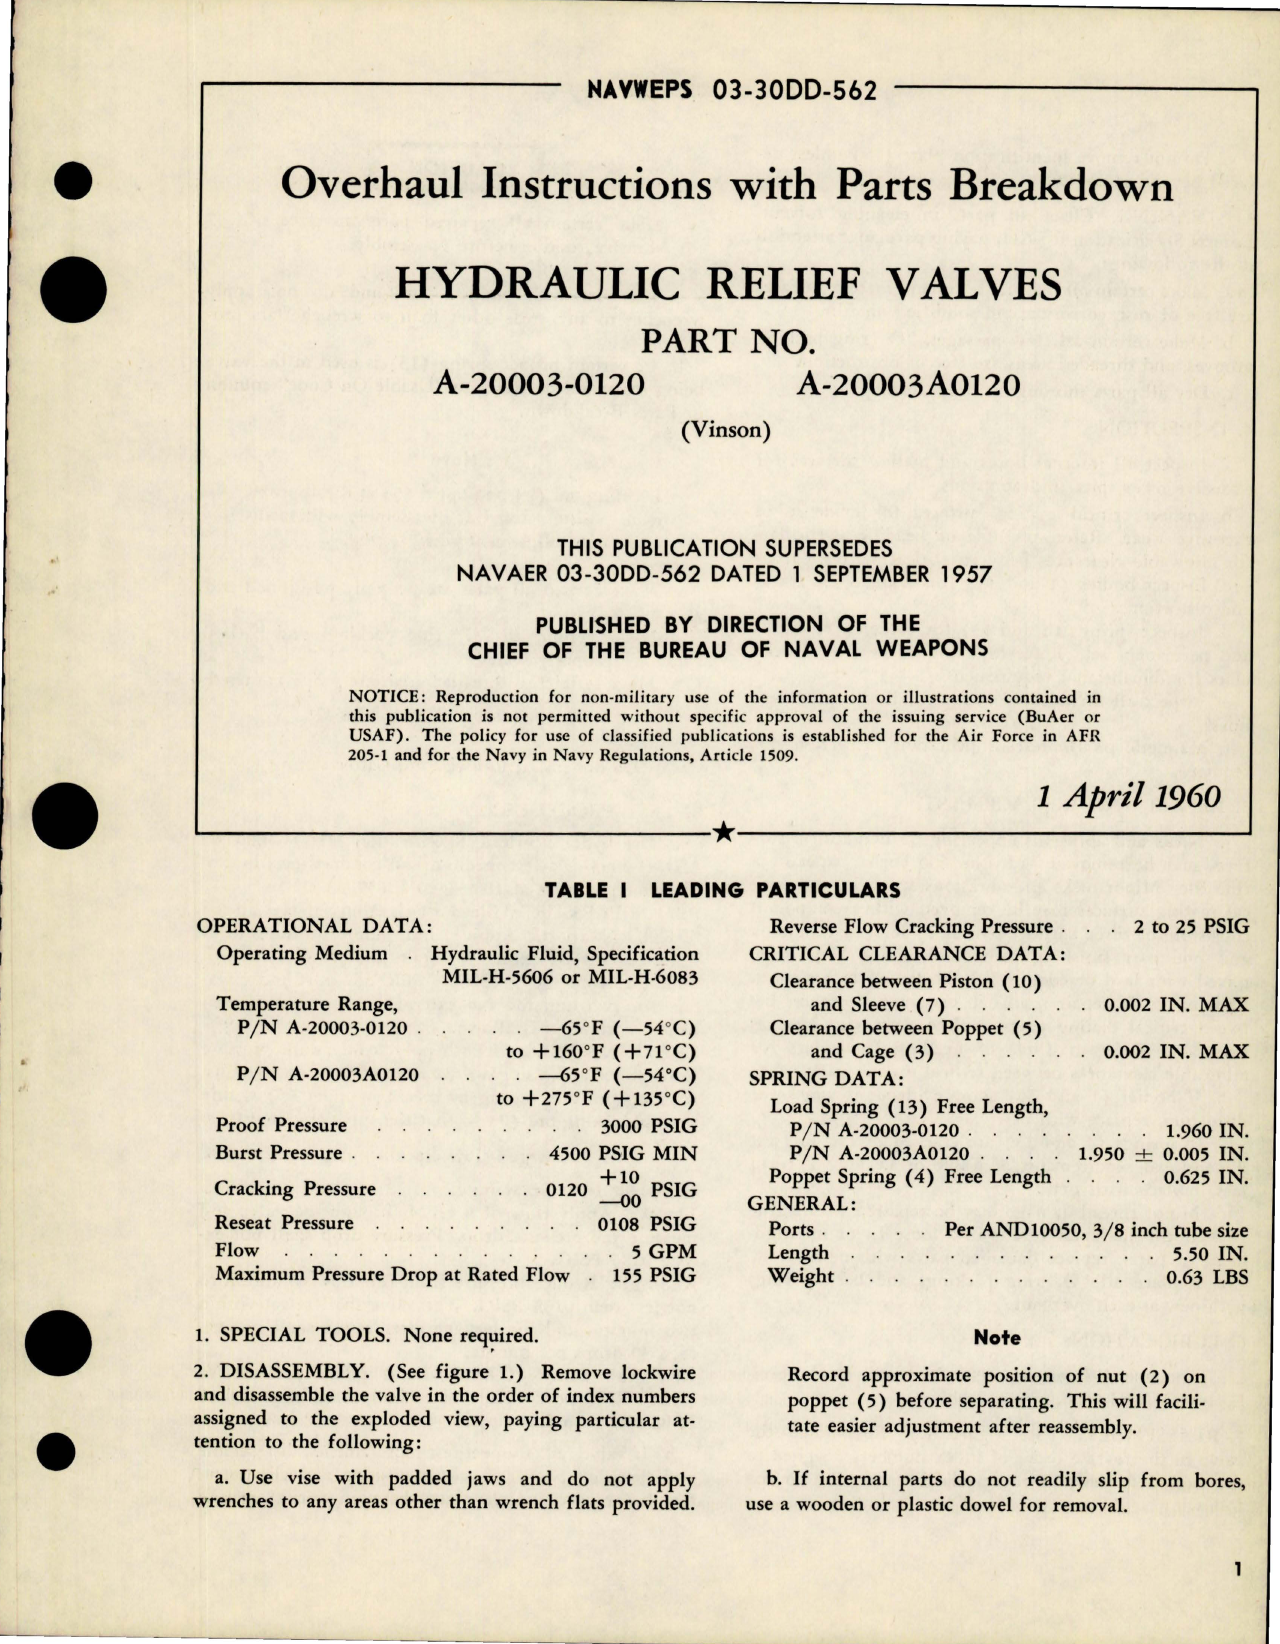 Sample page 1 from AirCorps Library document: Overhaul Instructions with Parts Breakdown for Hydraulic Relief Valves - Part A-20003-0120, A-20003A0120 